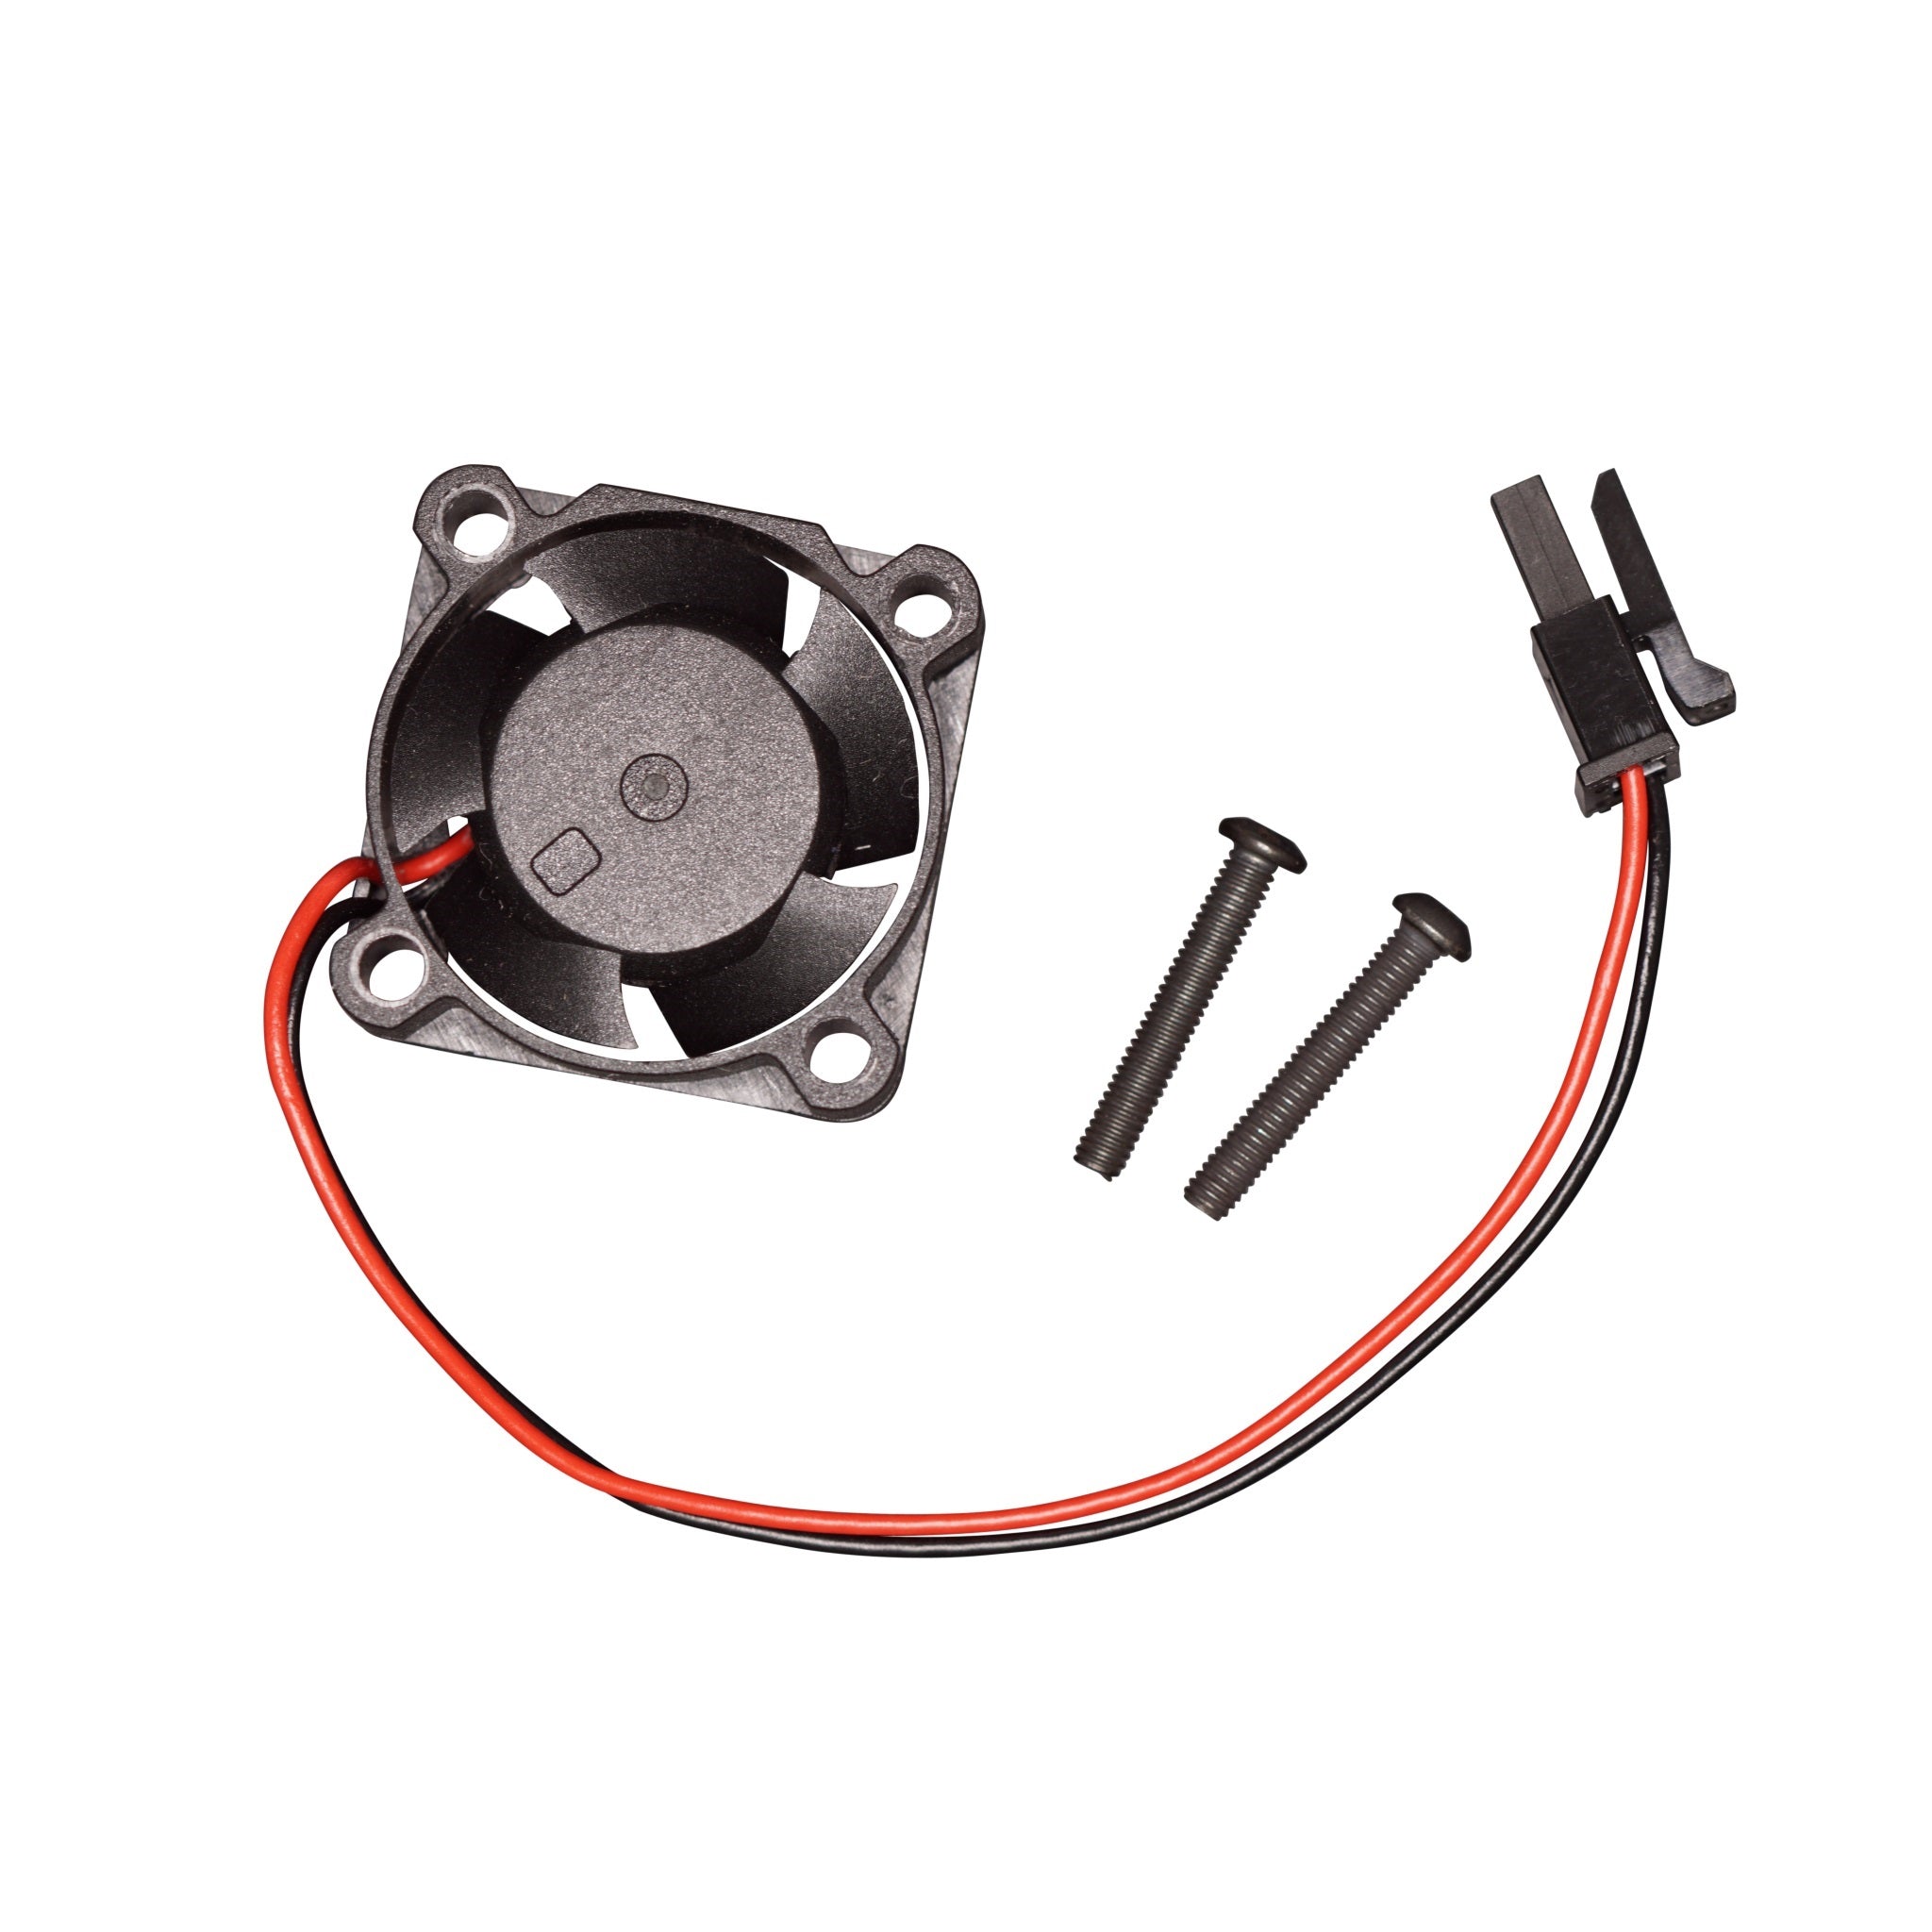 Hotend Cooling Fan with Screws